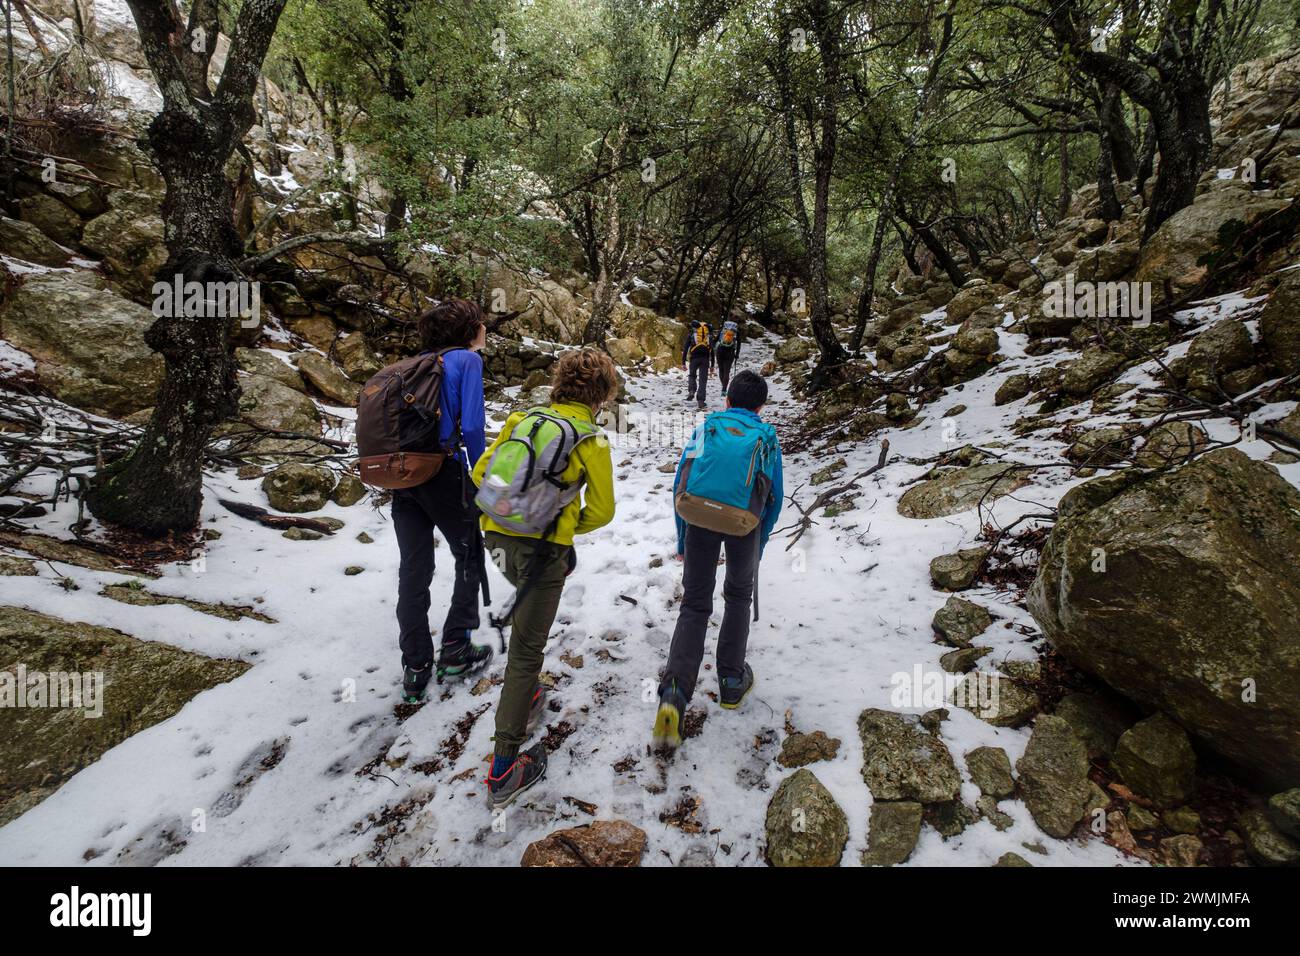 hikers in the Son Palou forest, Orient valley, Bunyola, Mallorca, Balearic Islands, Spain Stock Photo